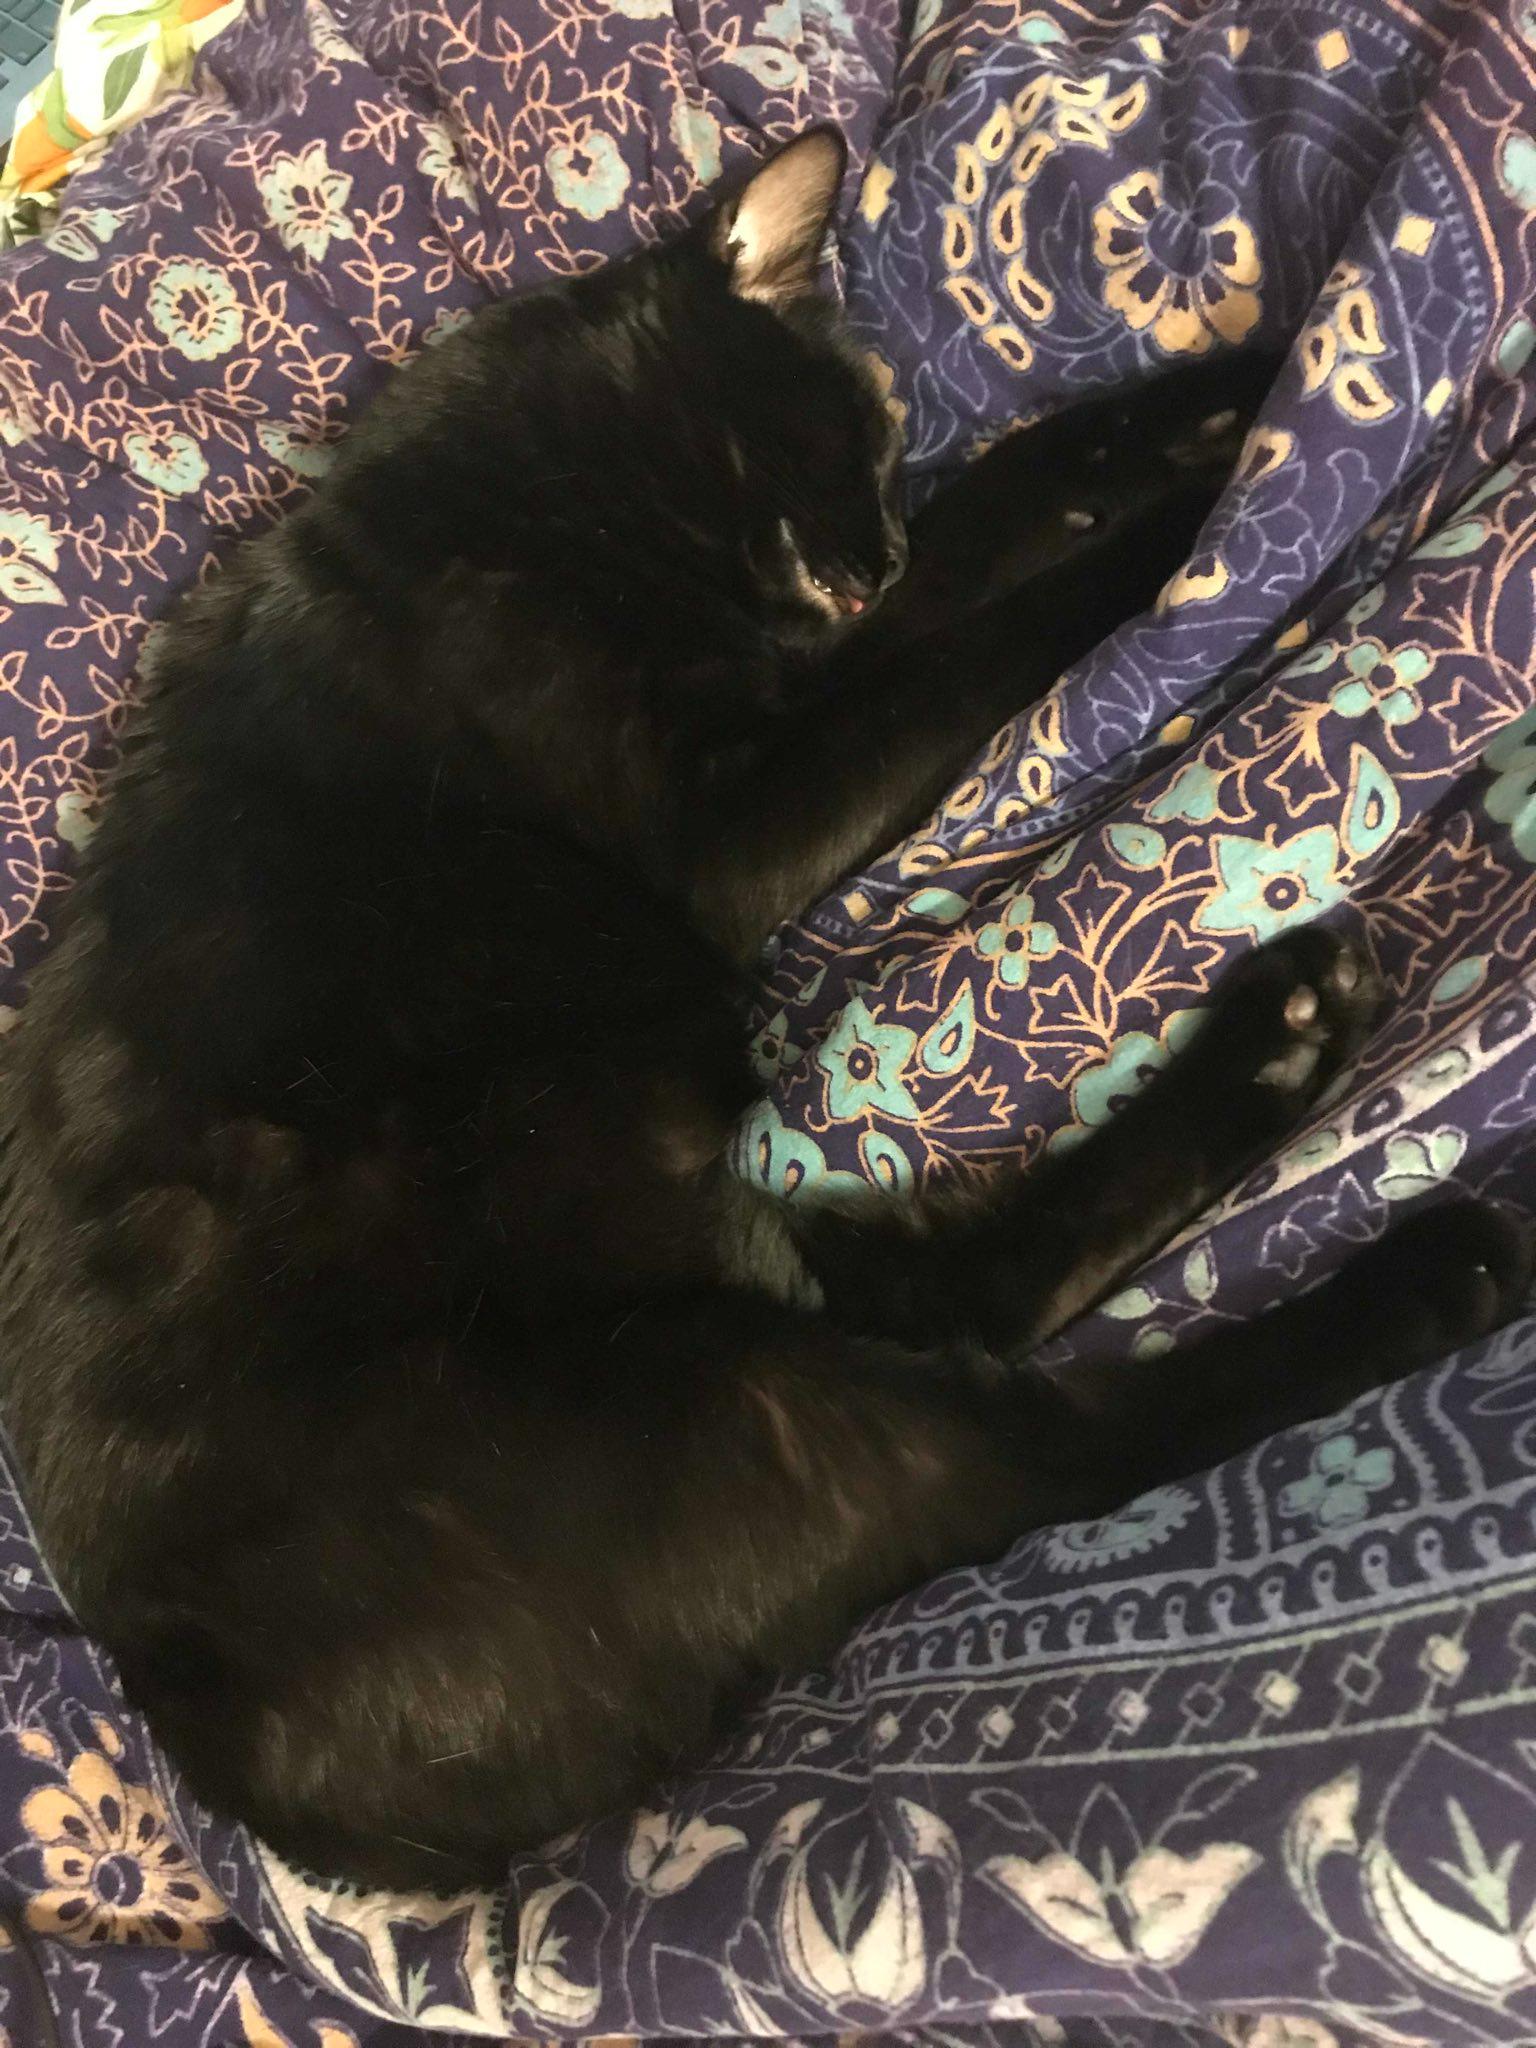 Photo of a black cat taken from above. He's sleeping on his side on a floral duvet cover. He looks very relaxed